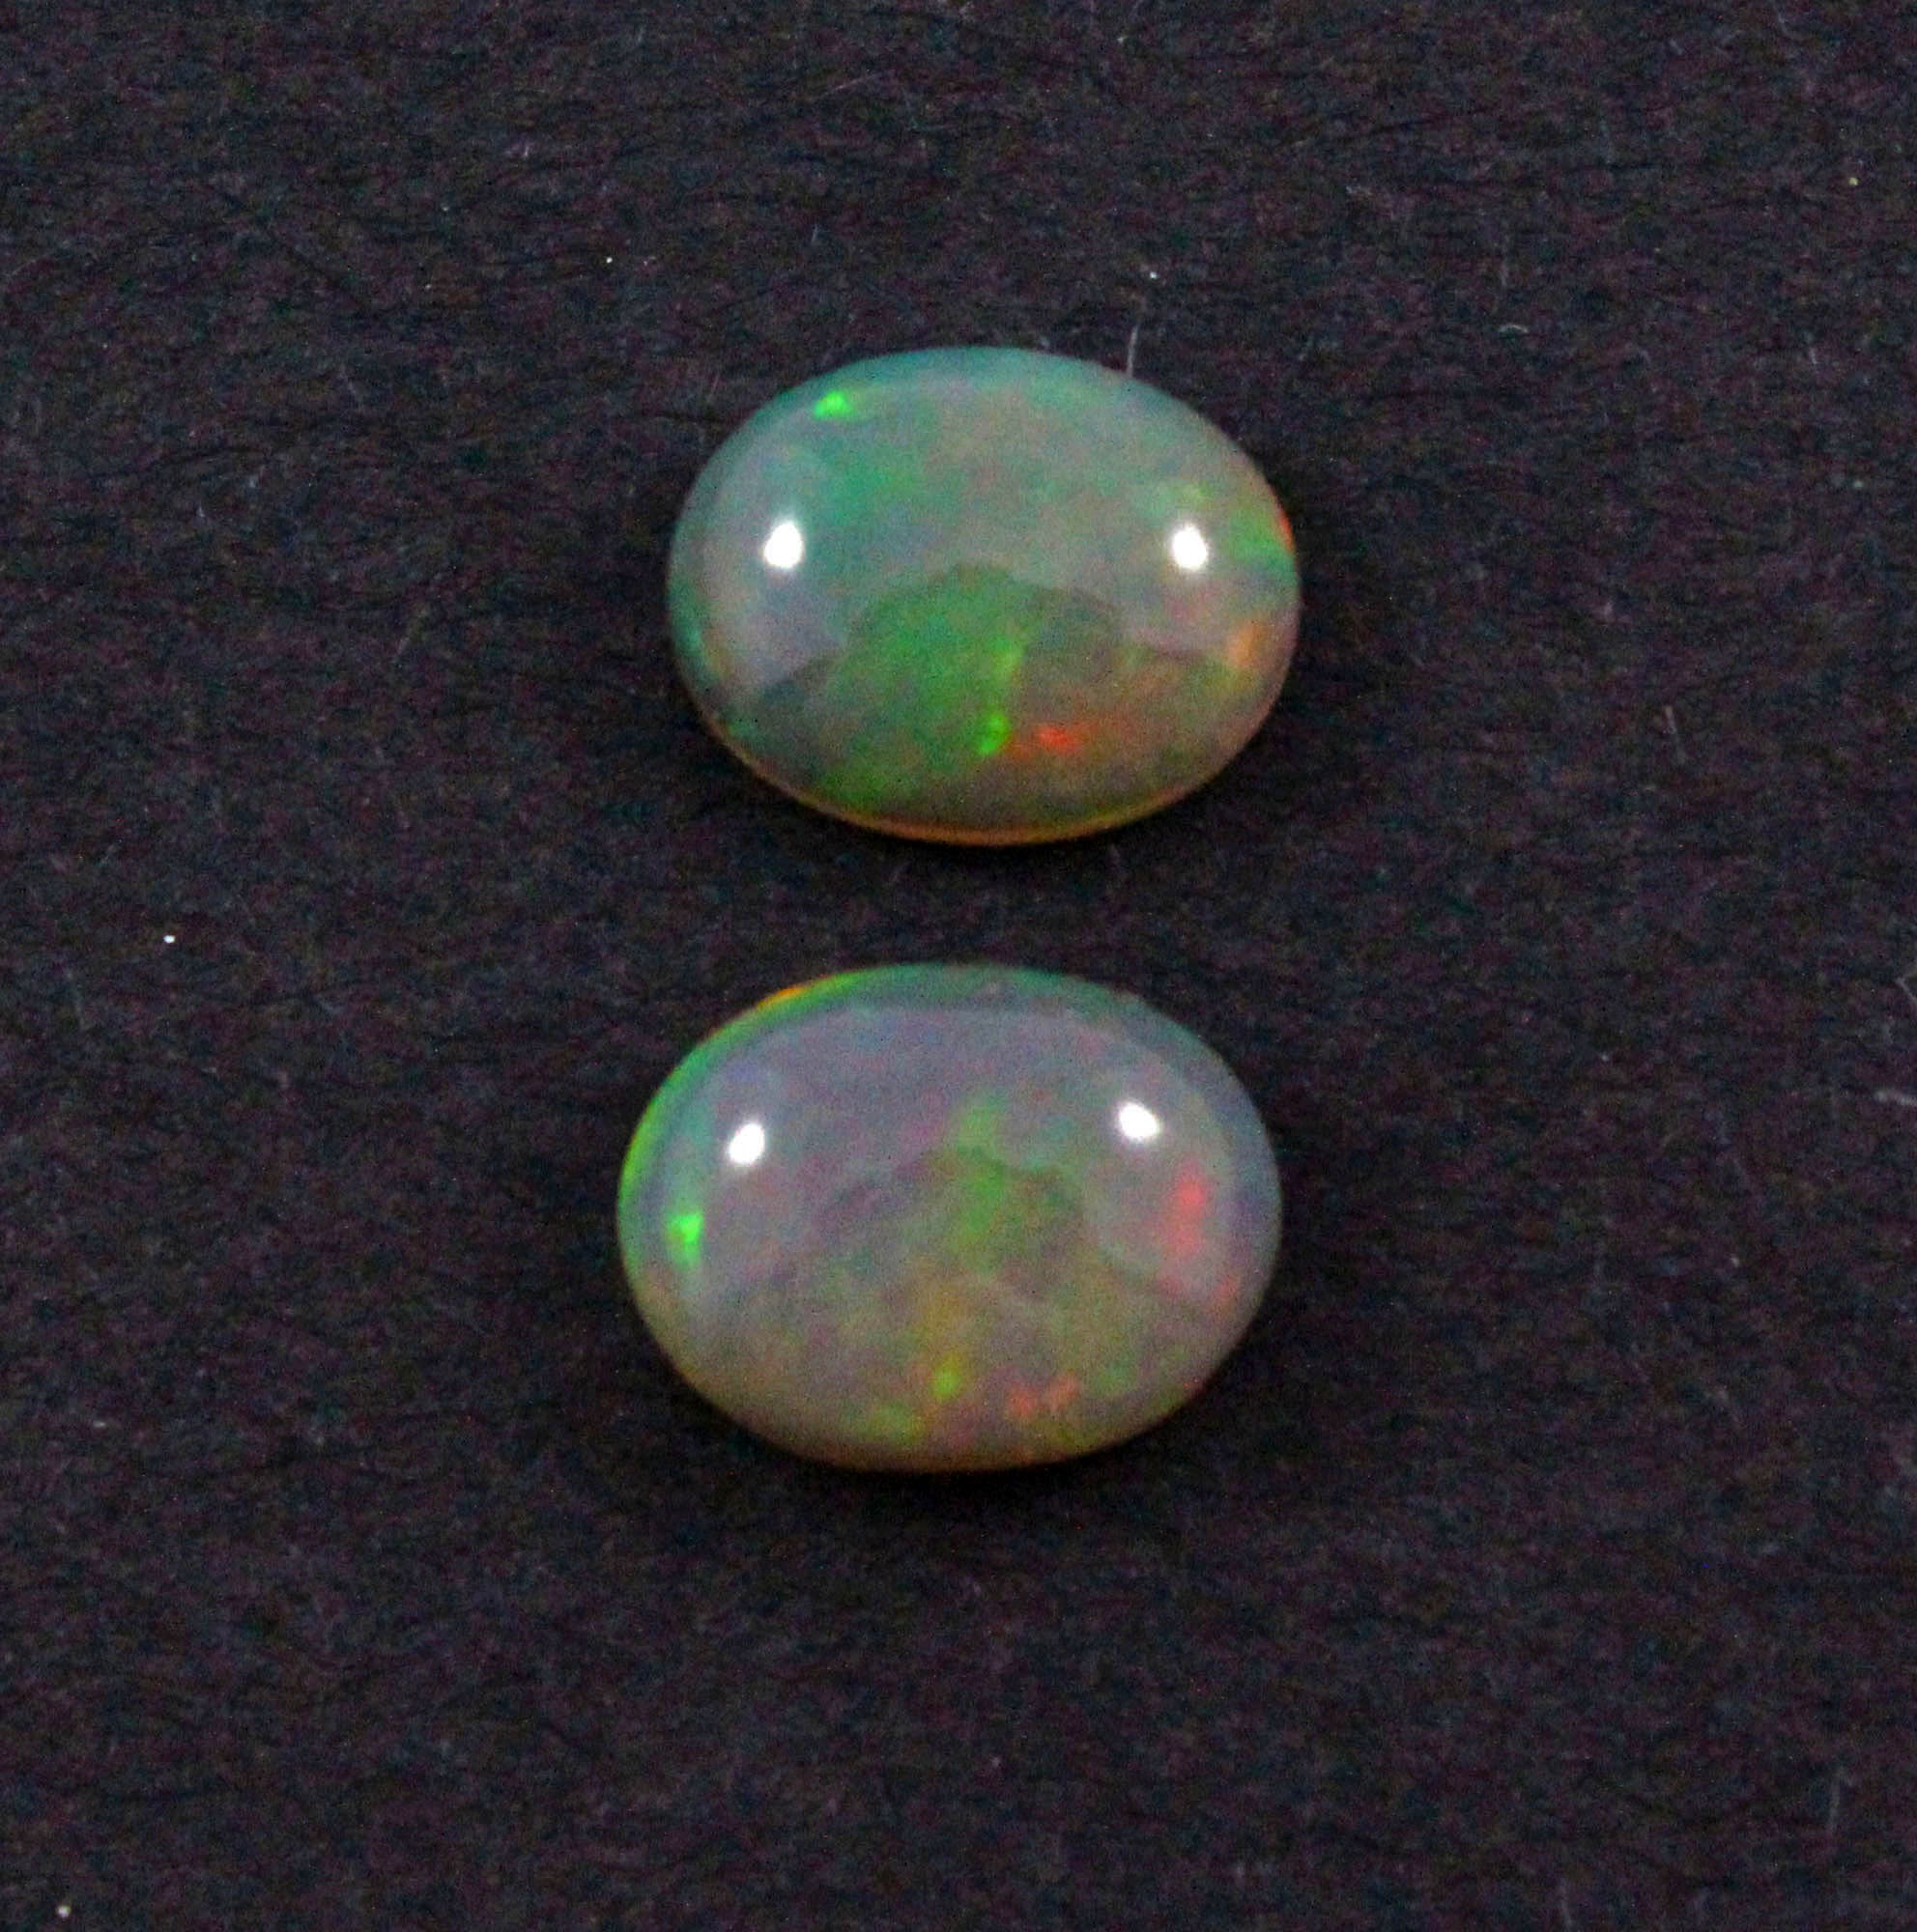 Australian jelly opal matched pair 3.16 carat total loose gemstone - Purchase only with custom order - Sarah Hughes - 4